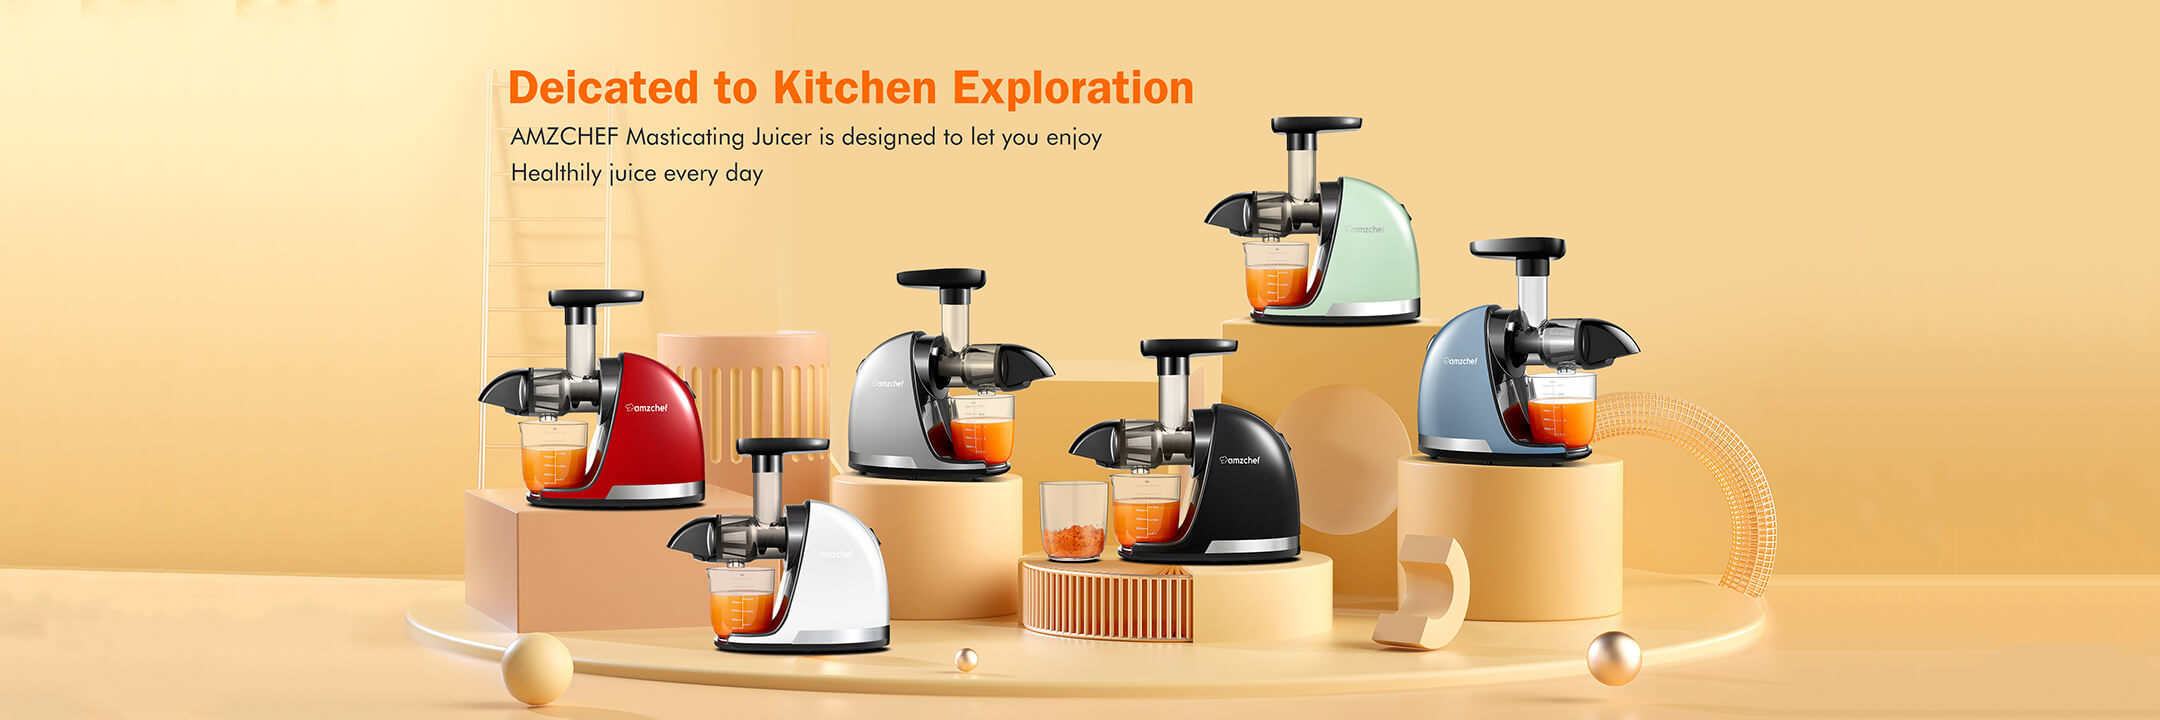 amzchef juicer family